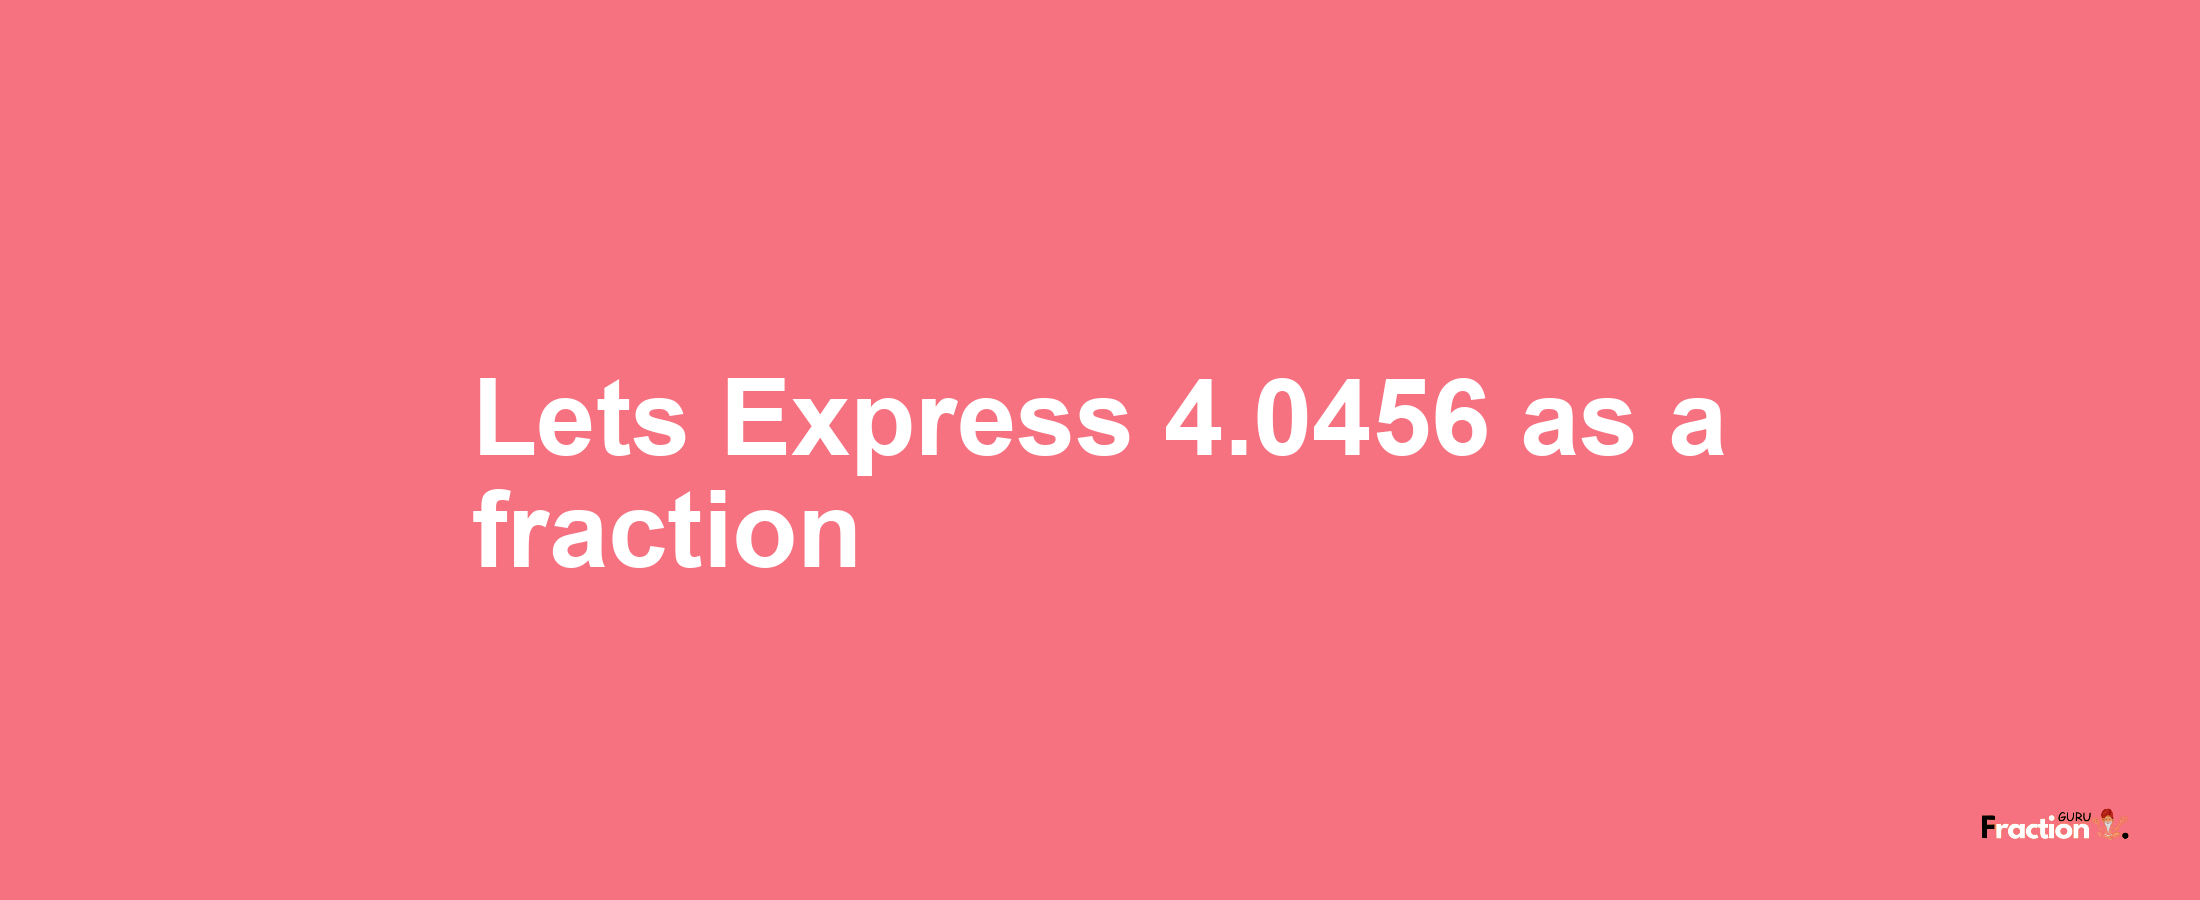 Lets Express 4.0456 as afraction